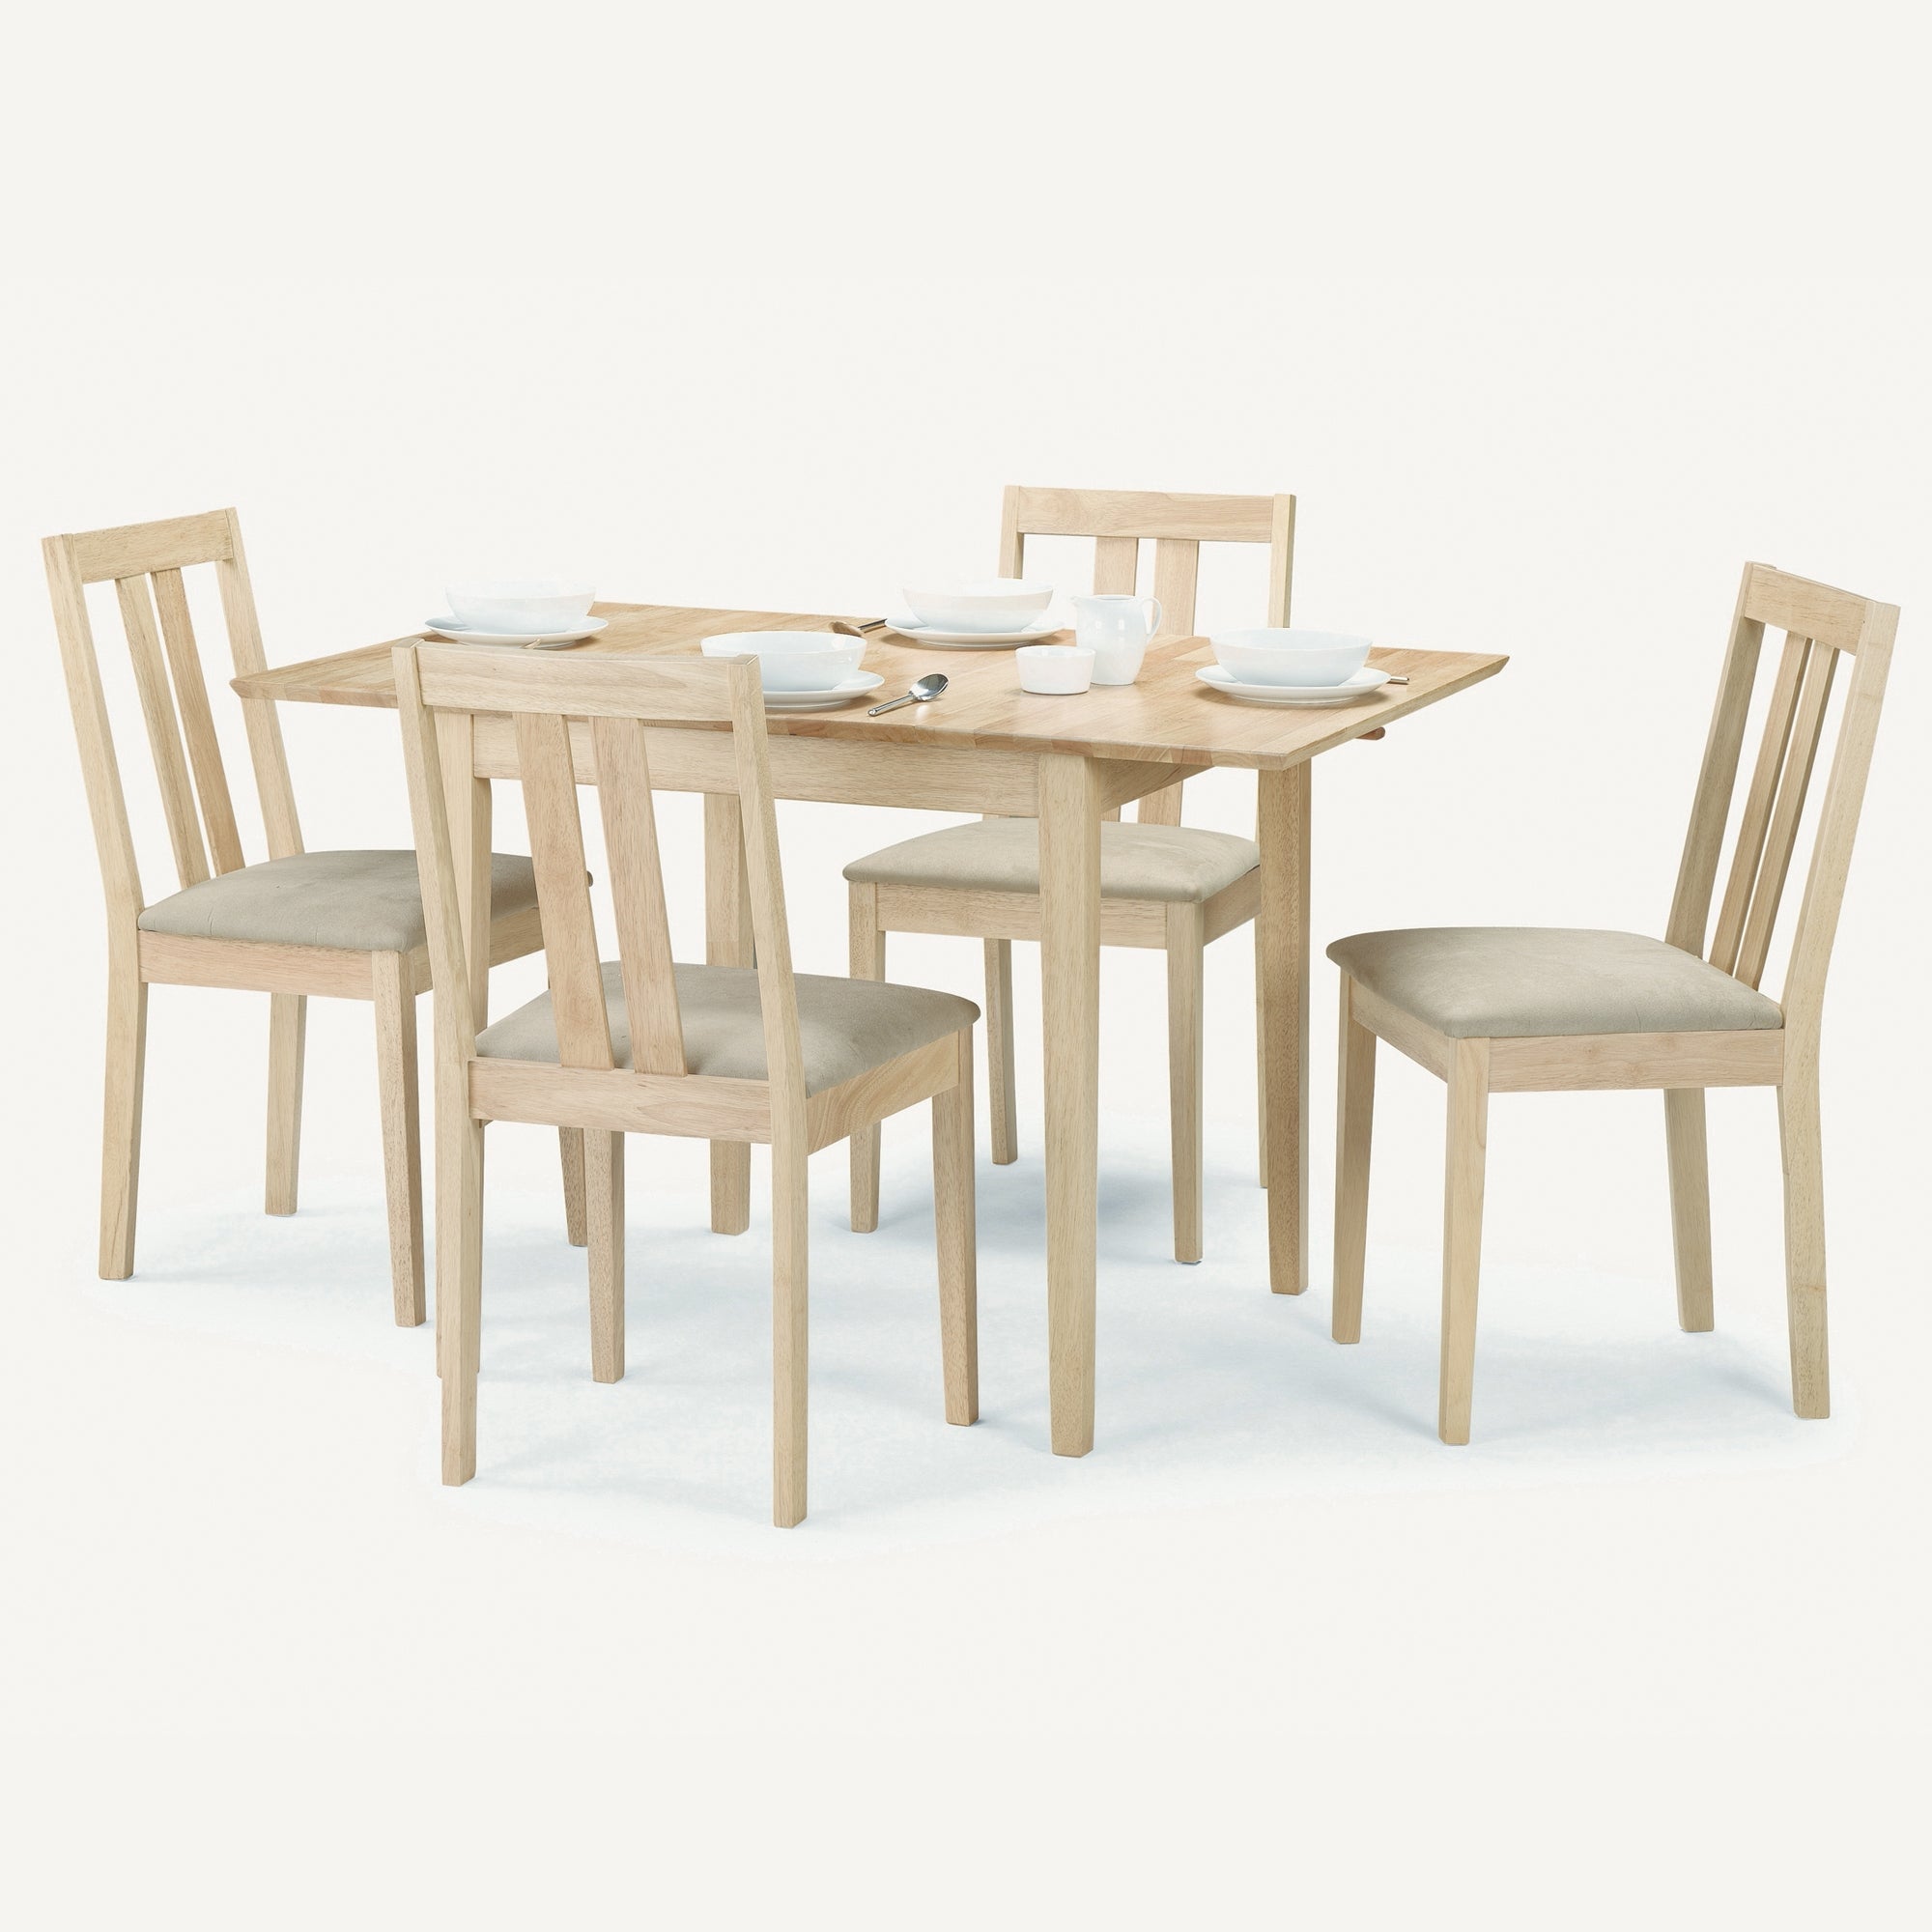 Rufford Square Extendable Dining Table with 4 Coast Chairs